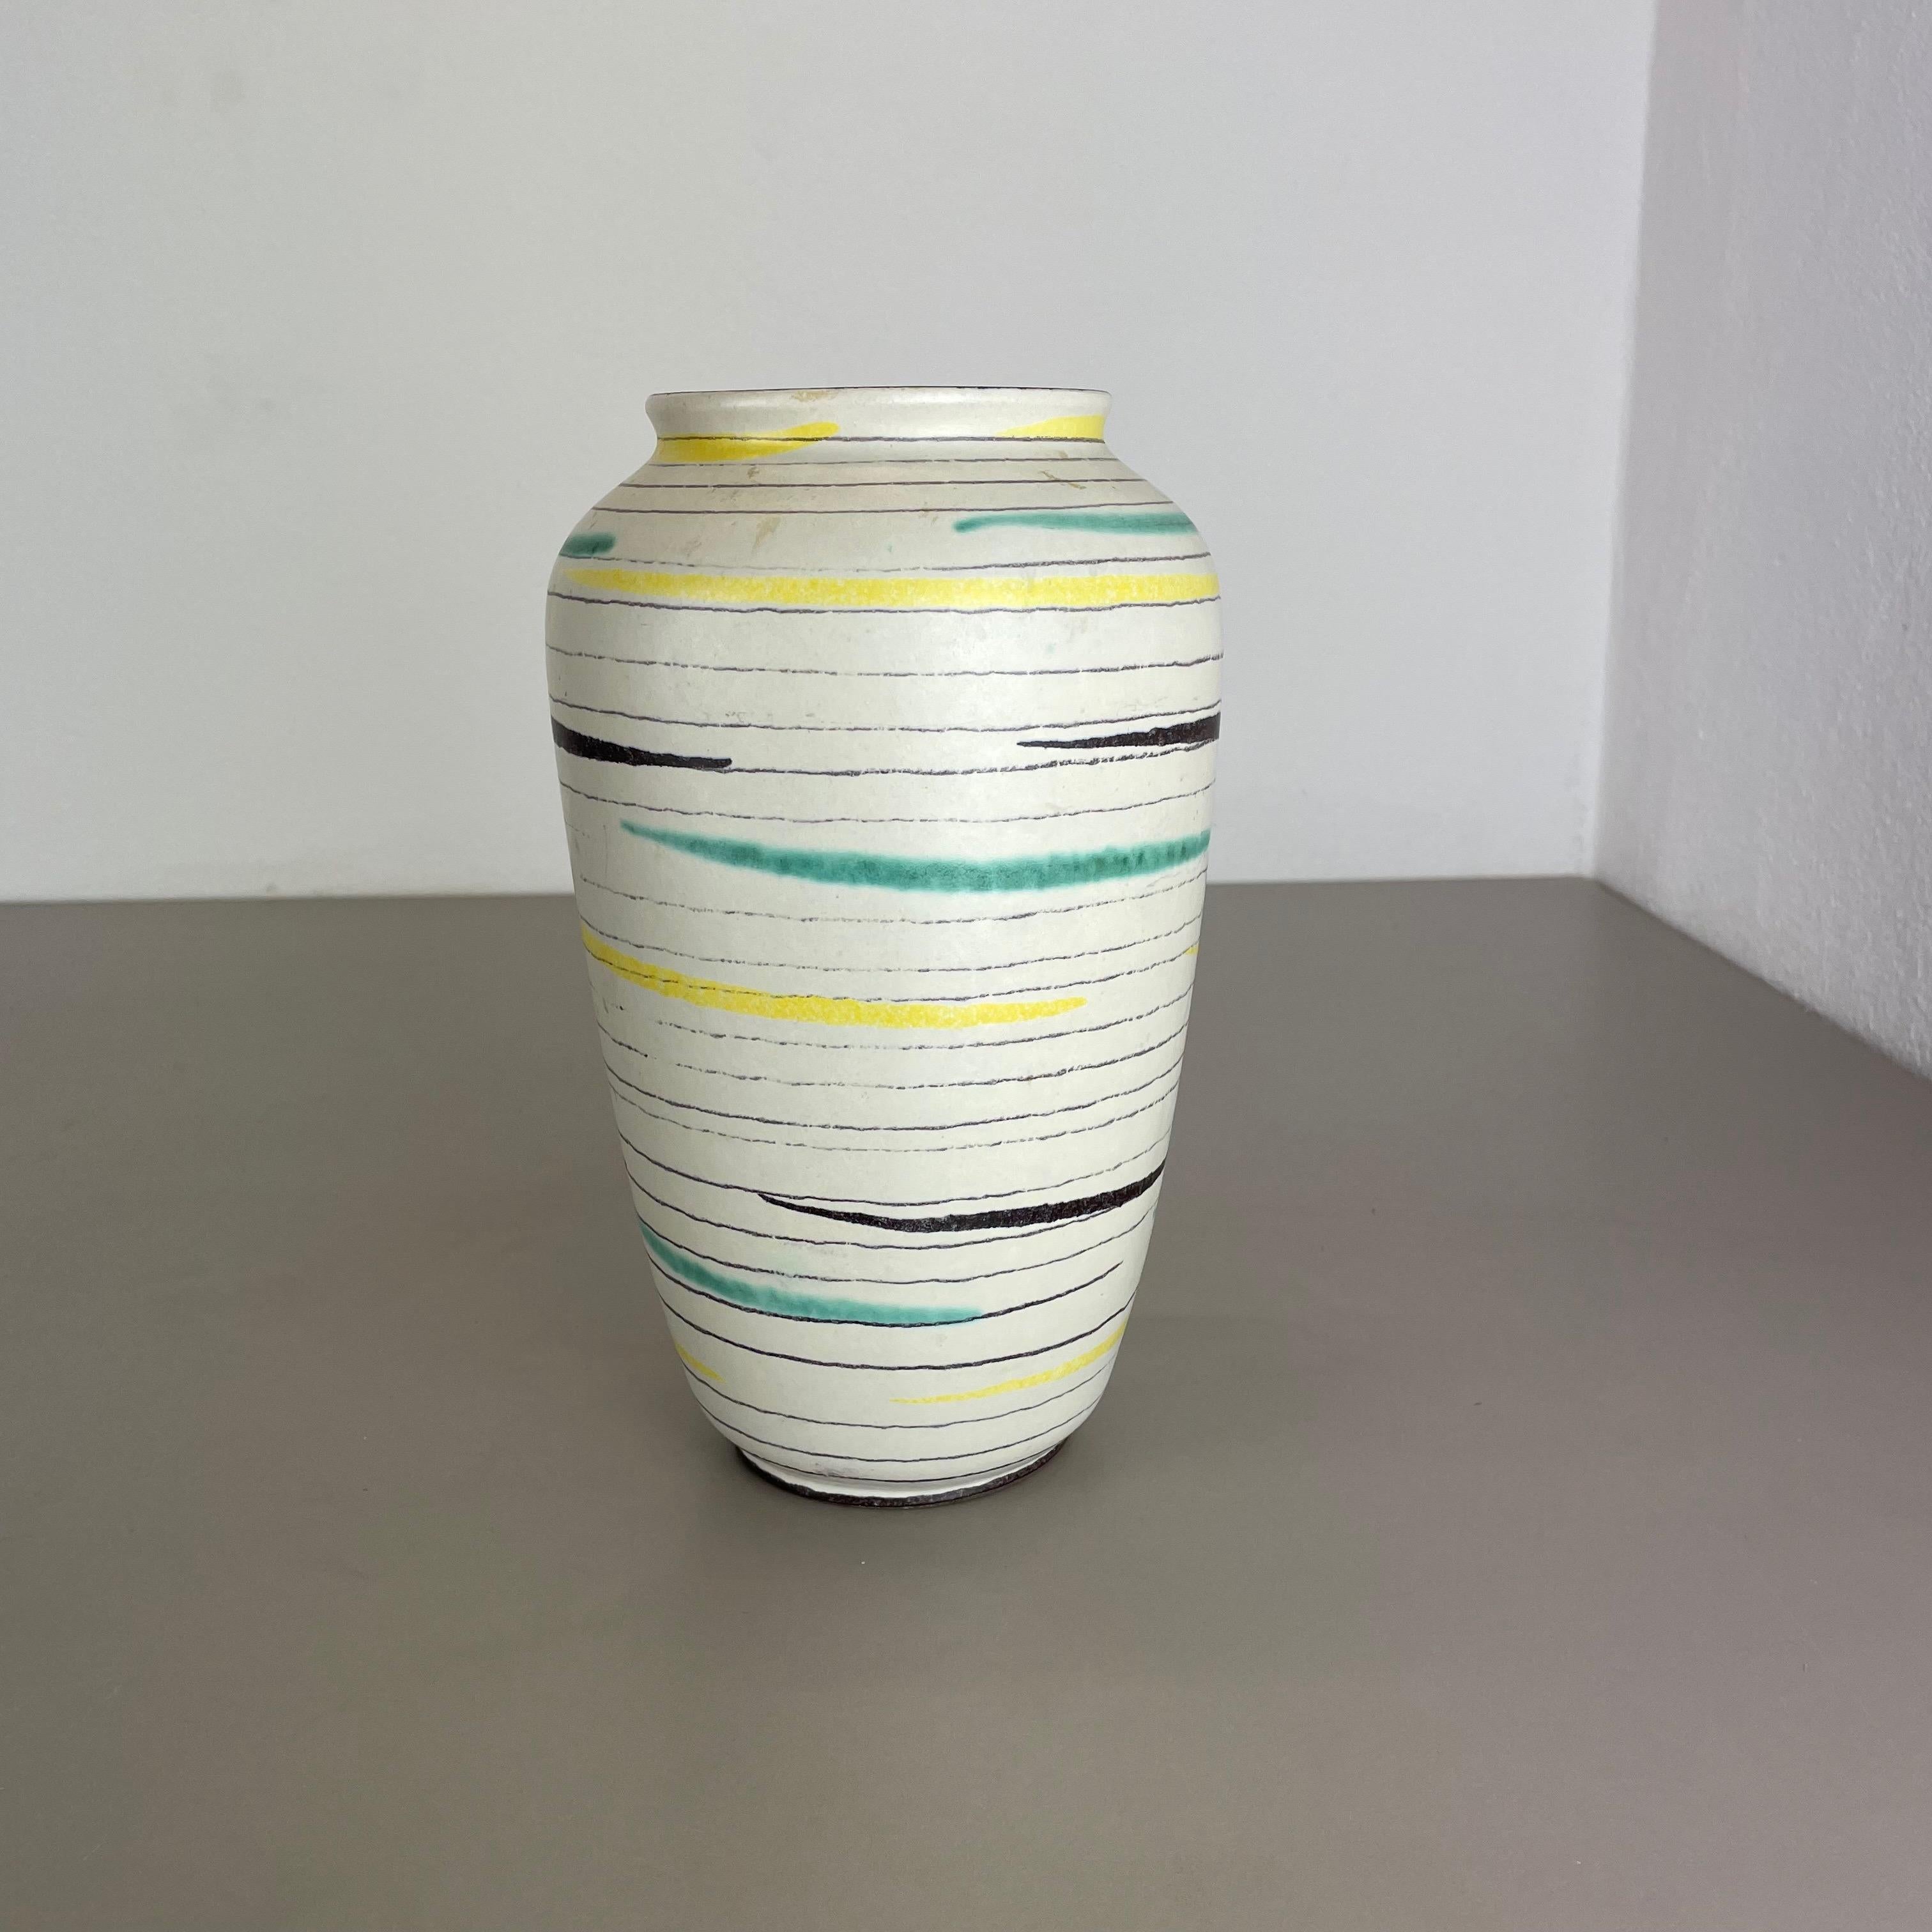 Article:

Pottery ceramic vase


Producer:

BAY Ceramic, Germany



Decade:

1950s




Original vintage 1970s pottery ceramic vase made in Germany. High quality German production with a nice abstract painting and super colorful